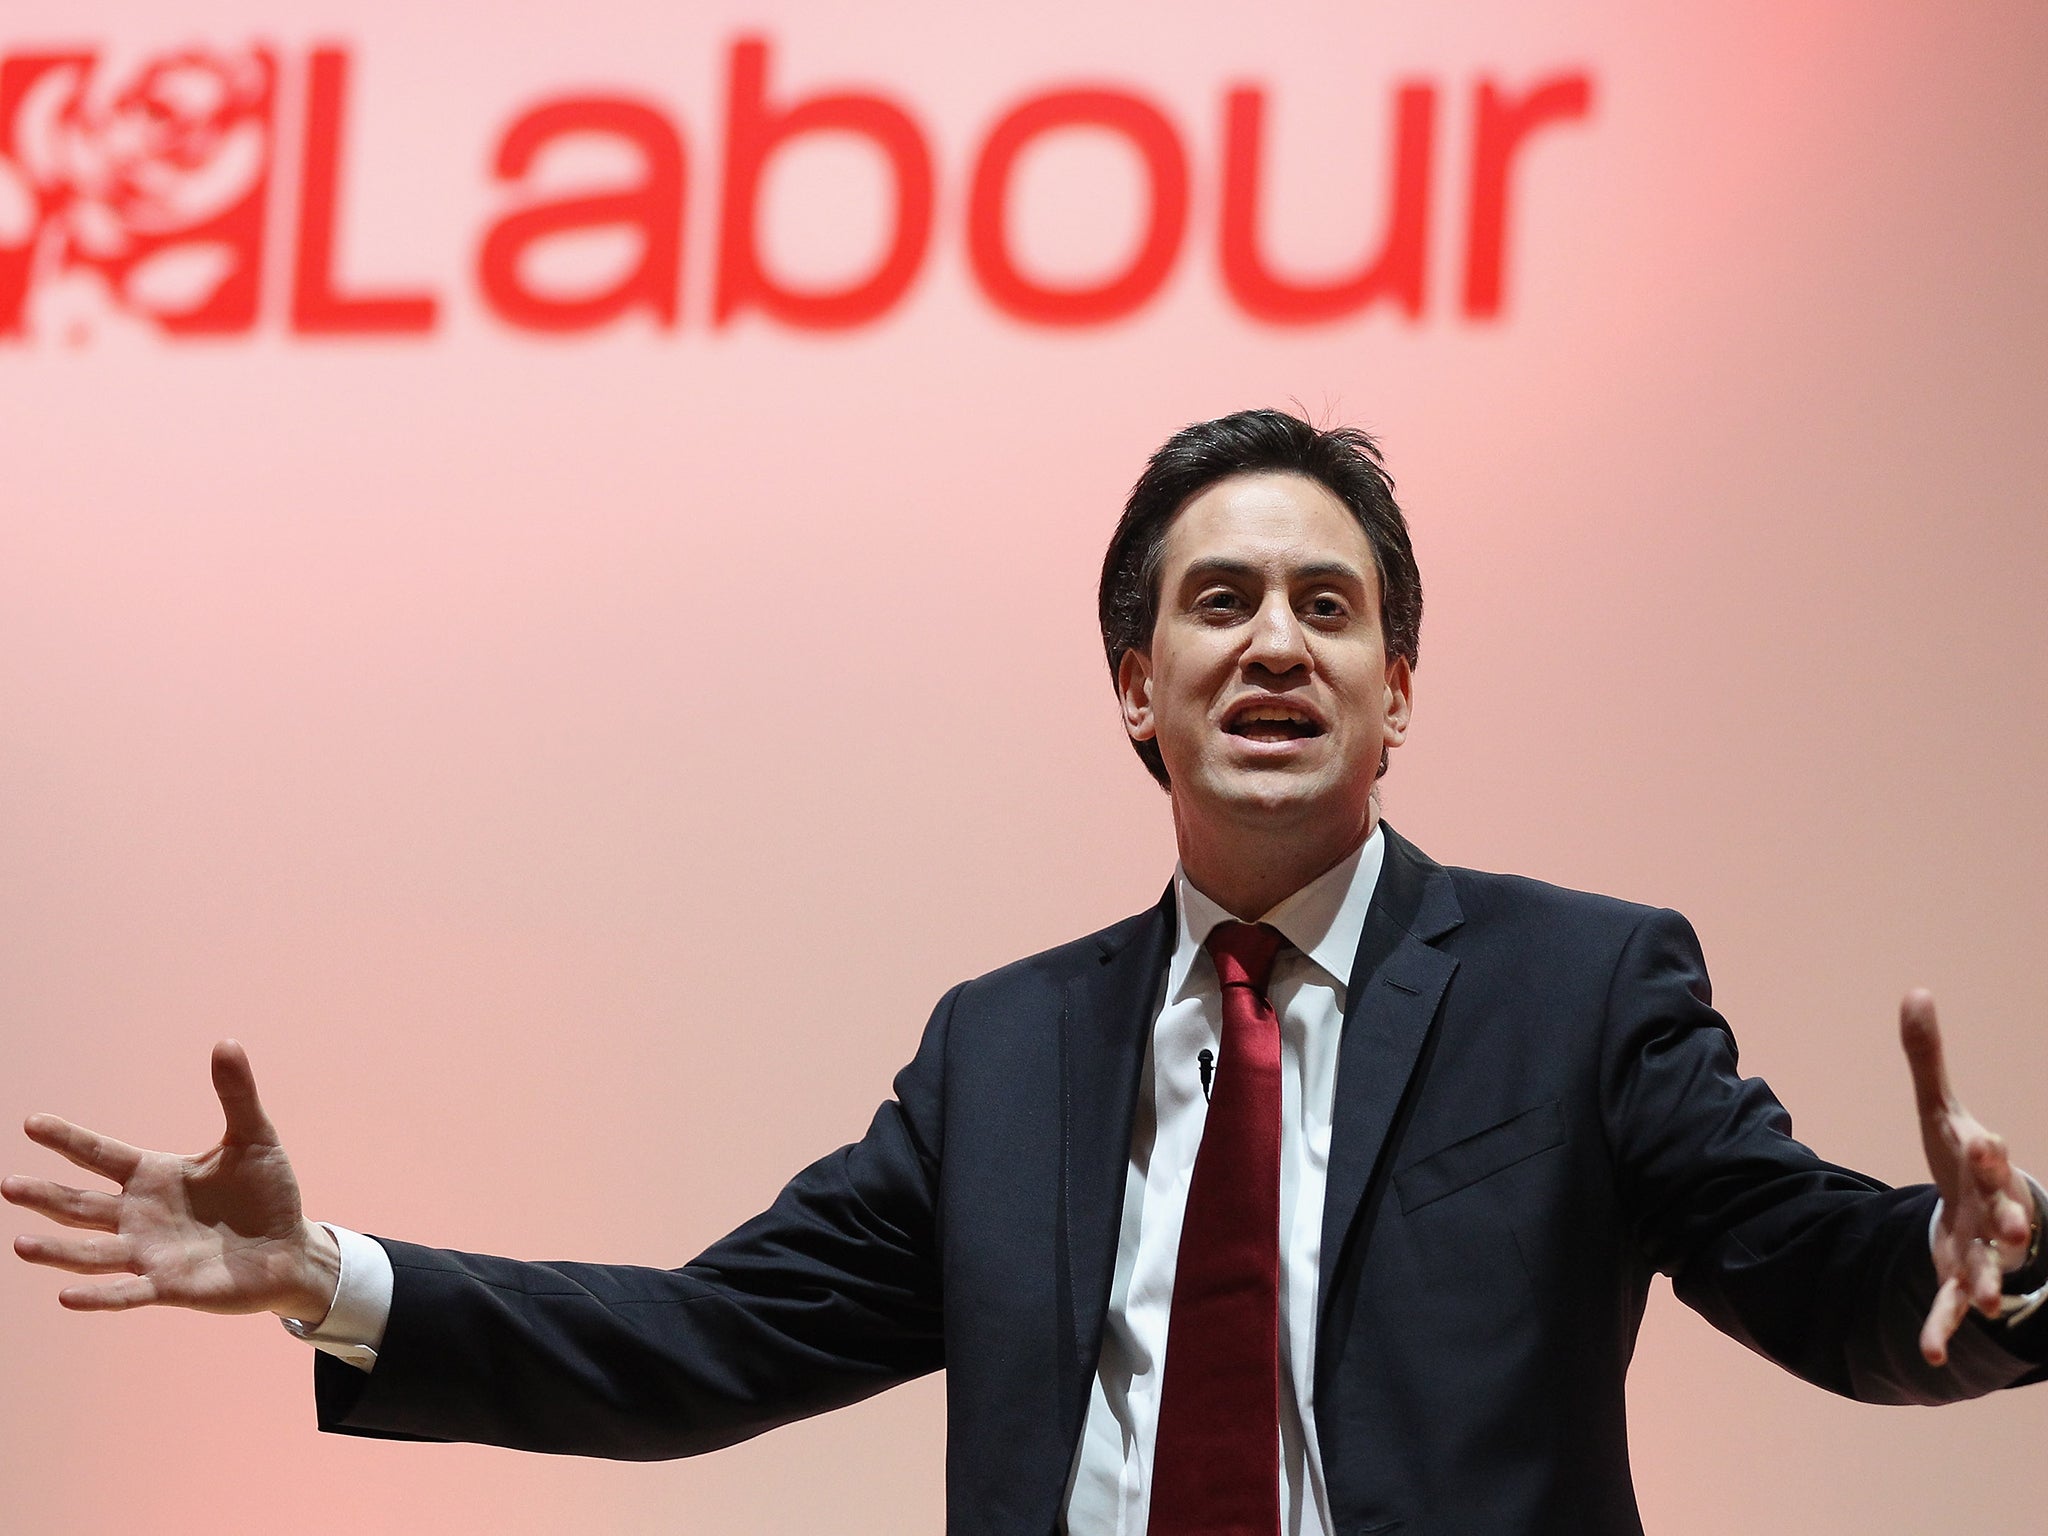 Lord Fink has called Miliband's claims 'untrue and defamatory'